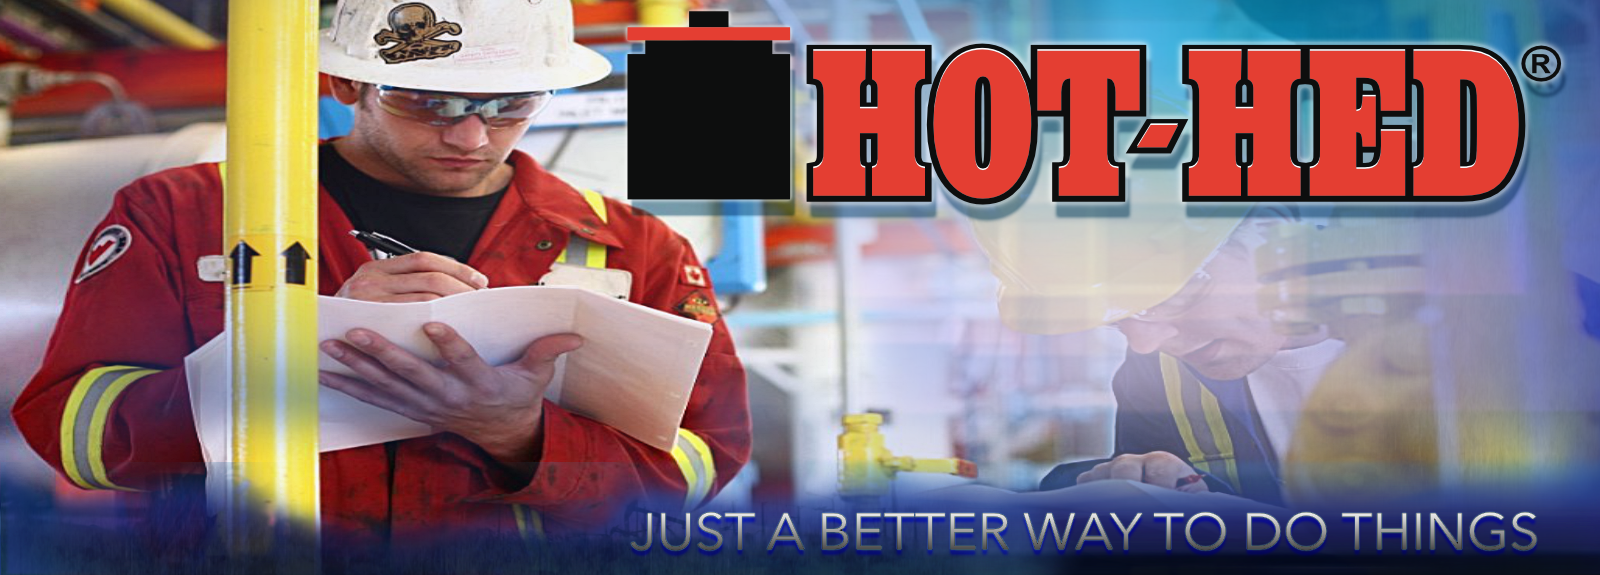 Hot-Hed®'s QMS Policy, ISO & OHSAS Certifications